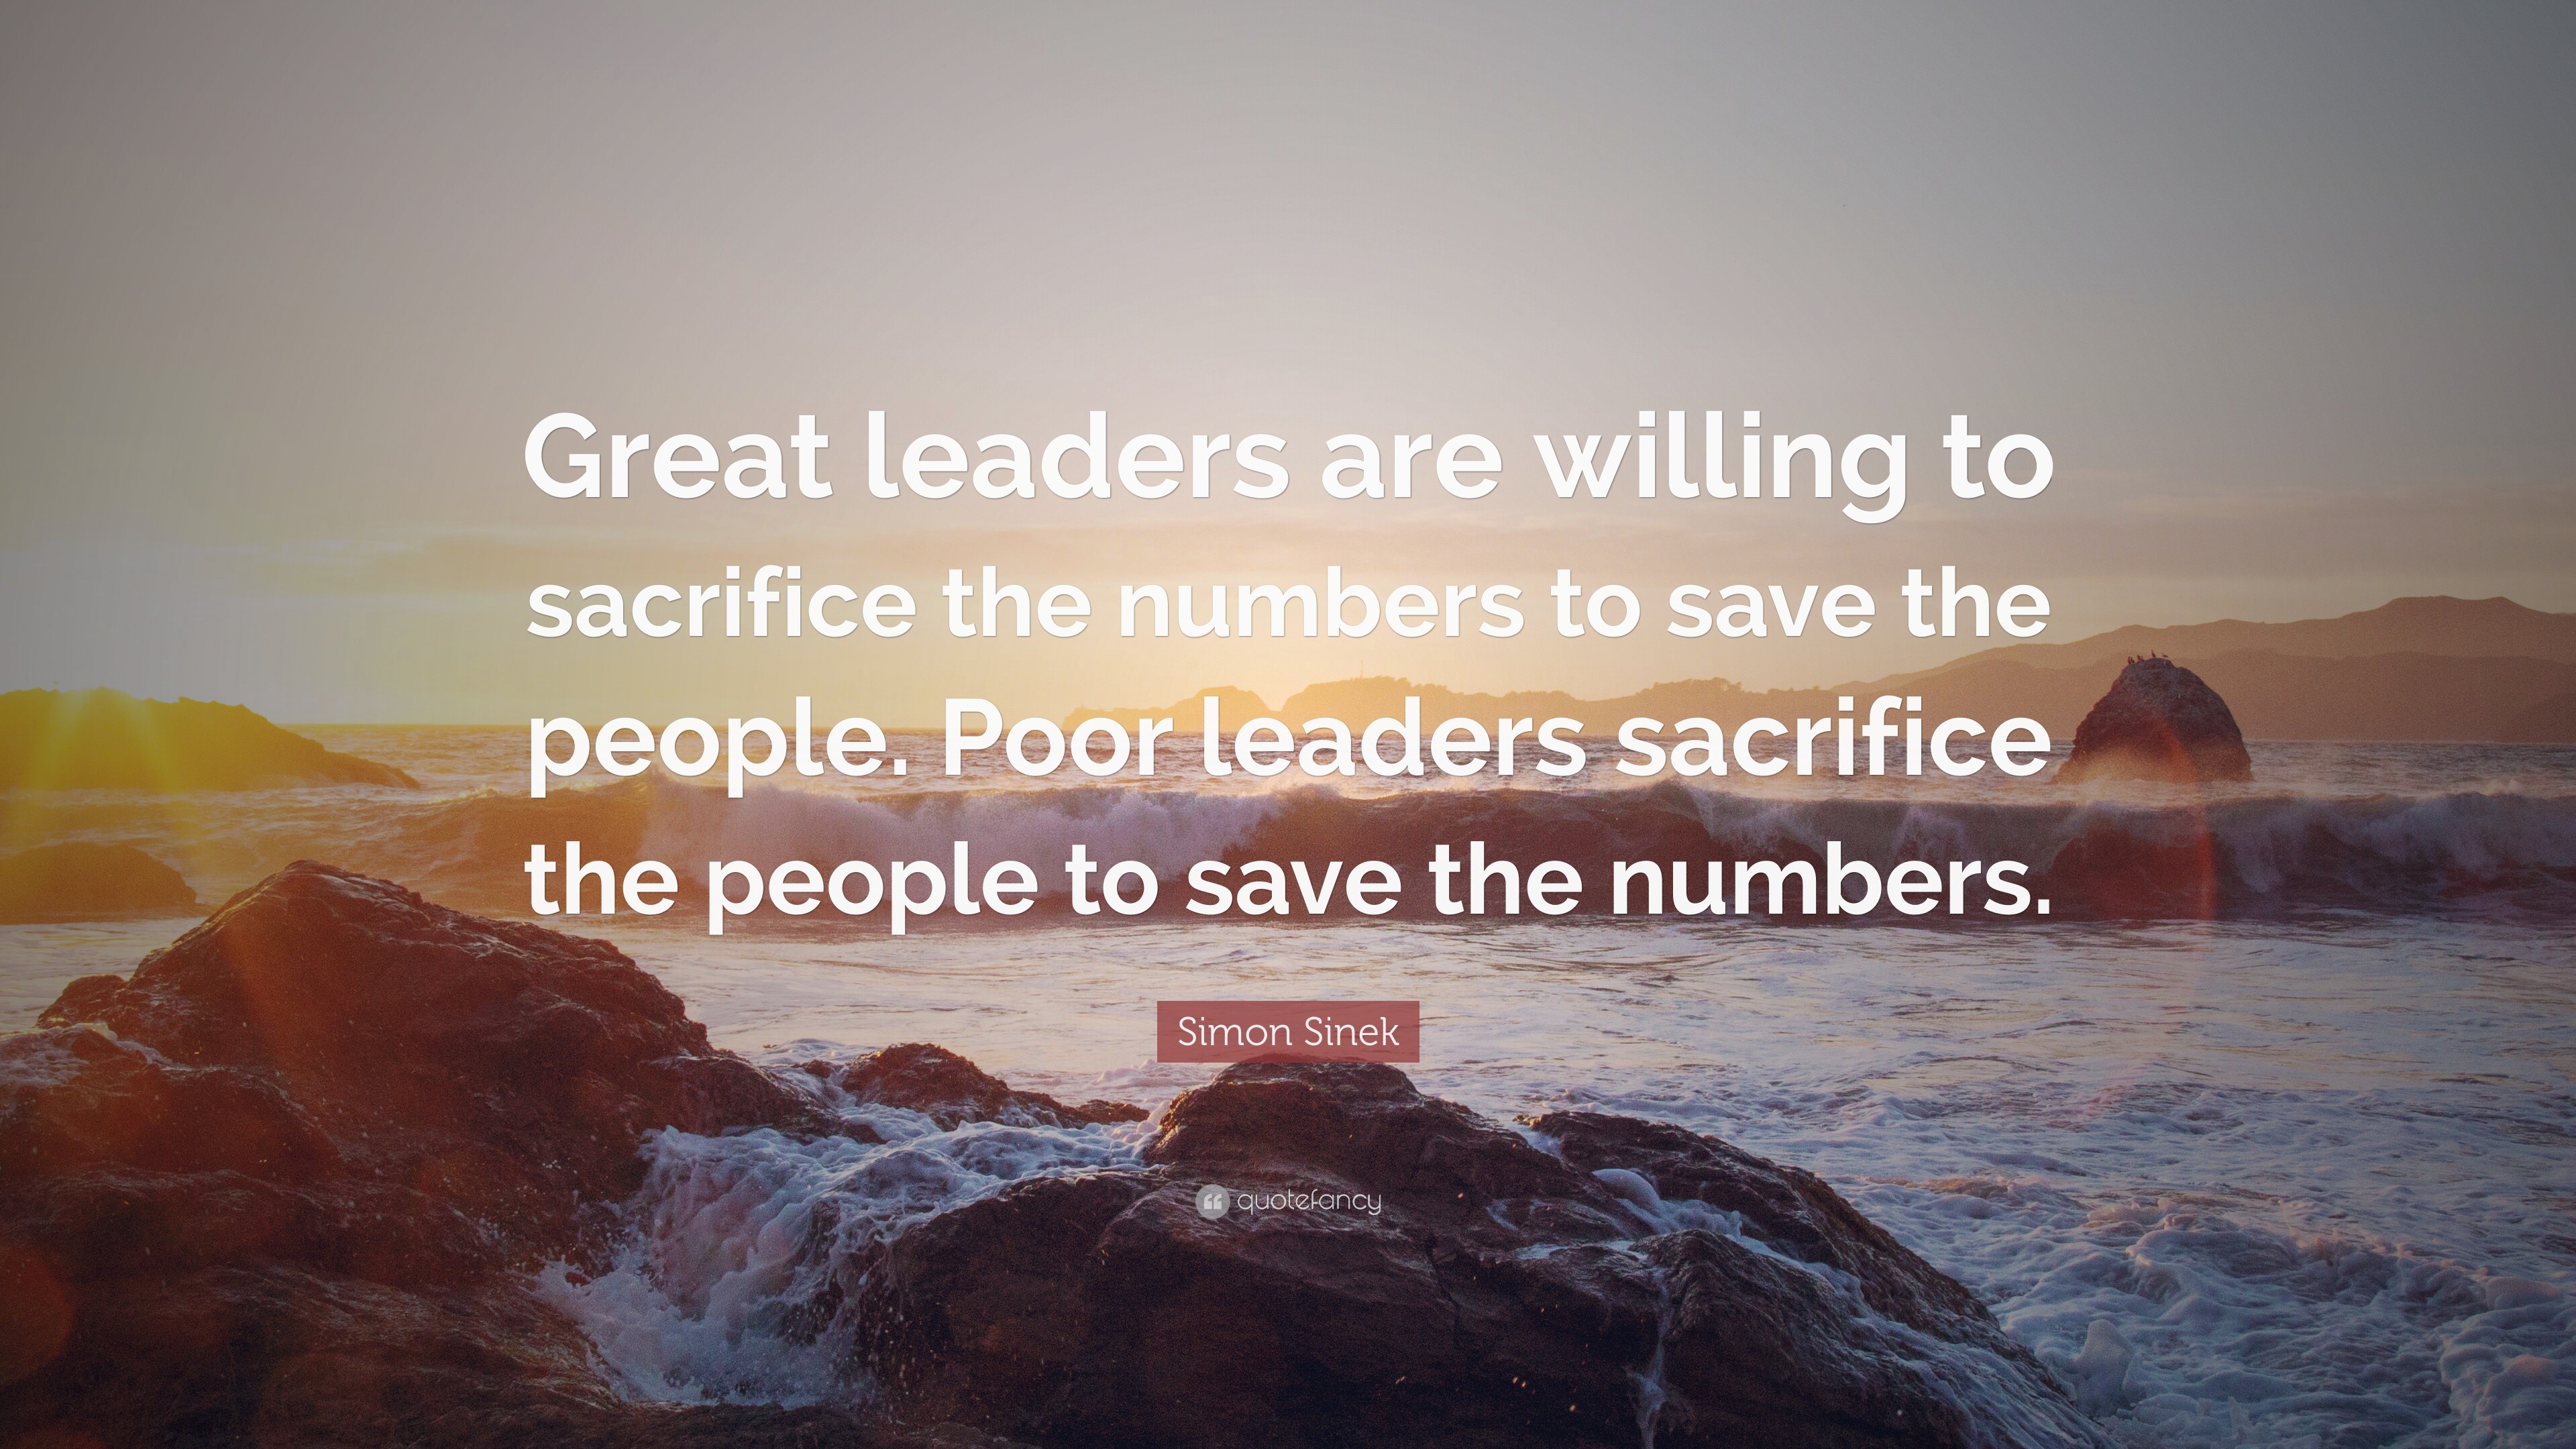 Simon Sinek Quote: “Great leaders are willing to sacrifice the numbers ...